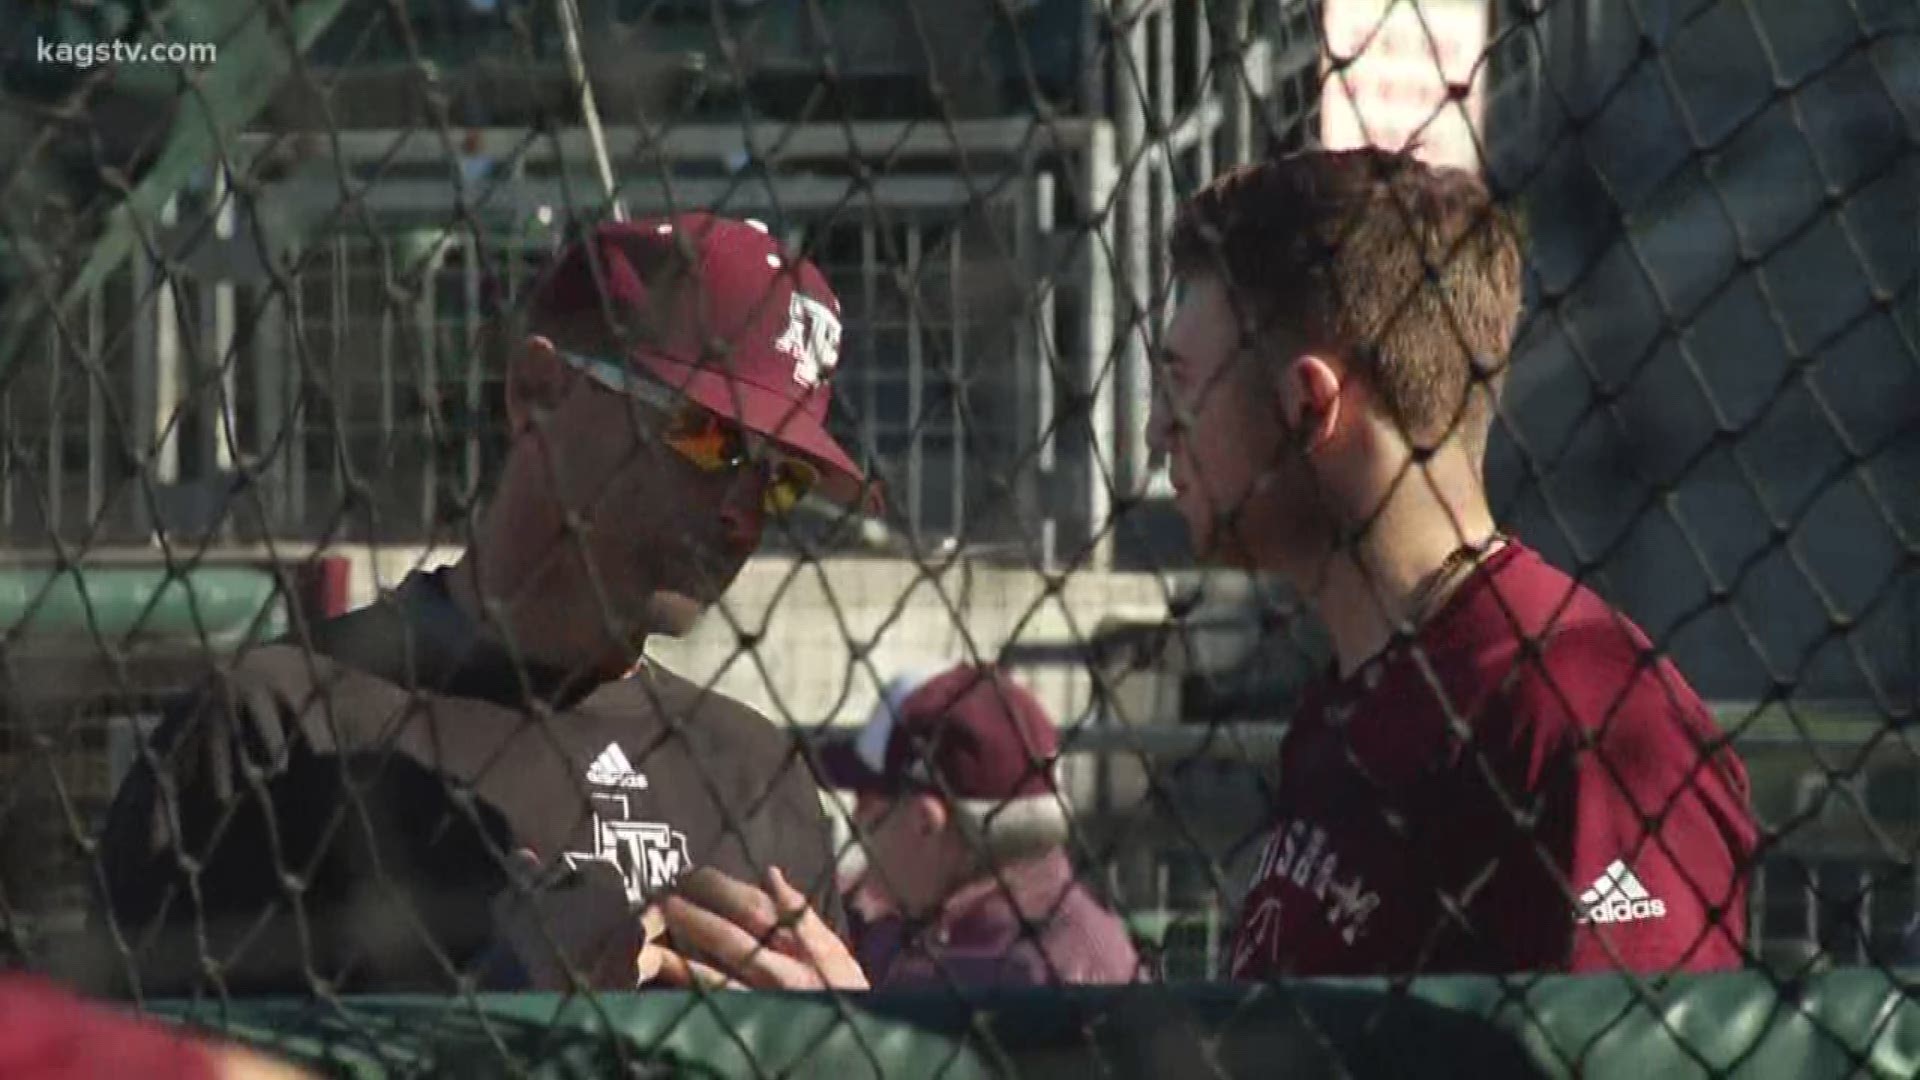 What a perfect day in Aggieland for the Texas A&M baseball team to hold its first practice leading up to the 2020 season.